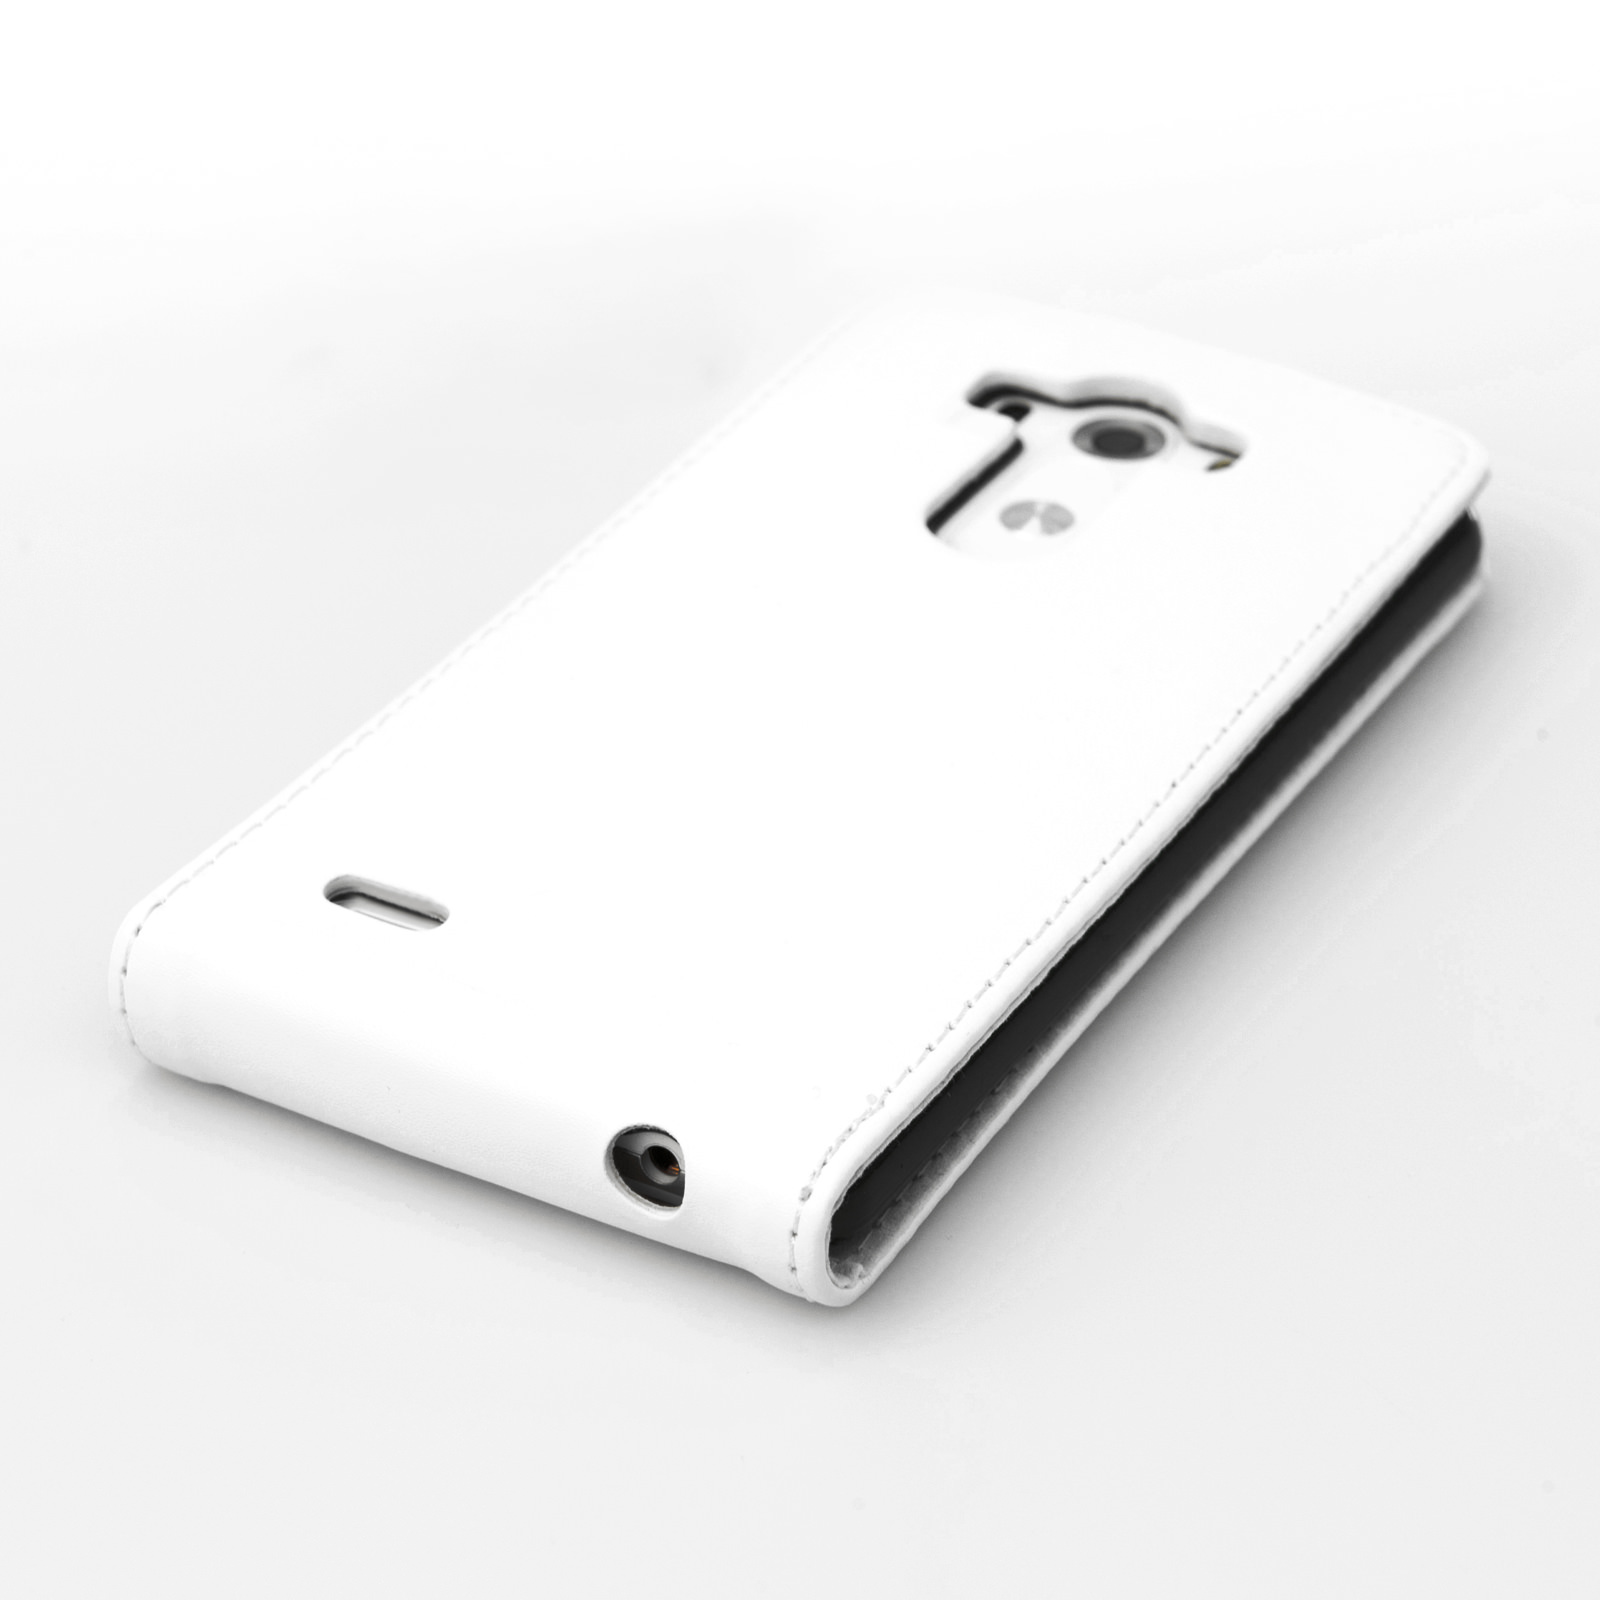 YouSave Accessories LG G3 Leather-Effect Flip Case - White